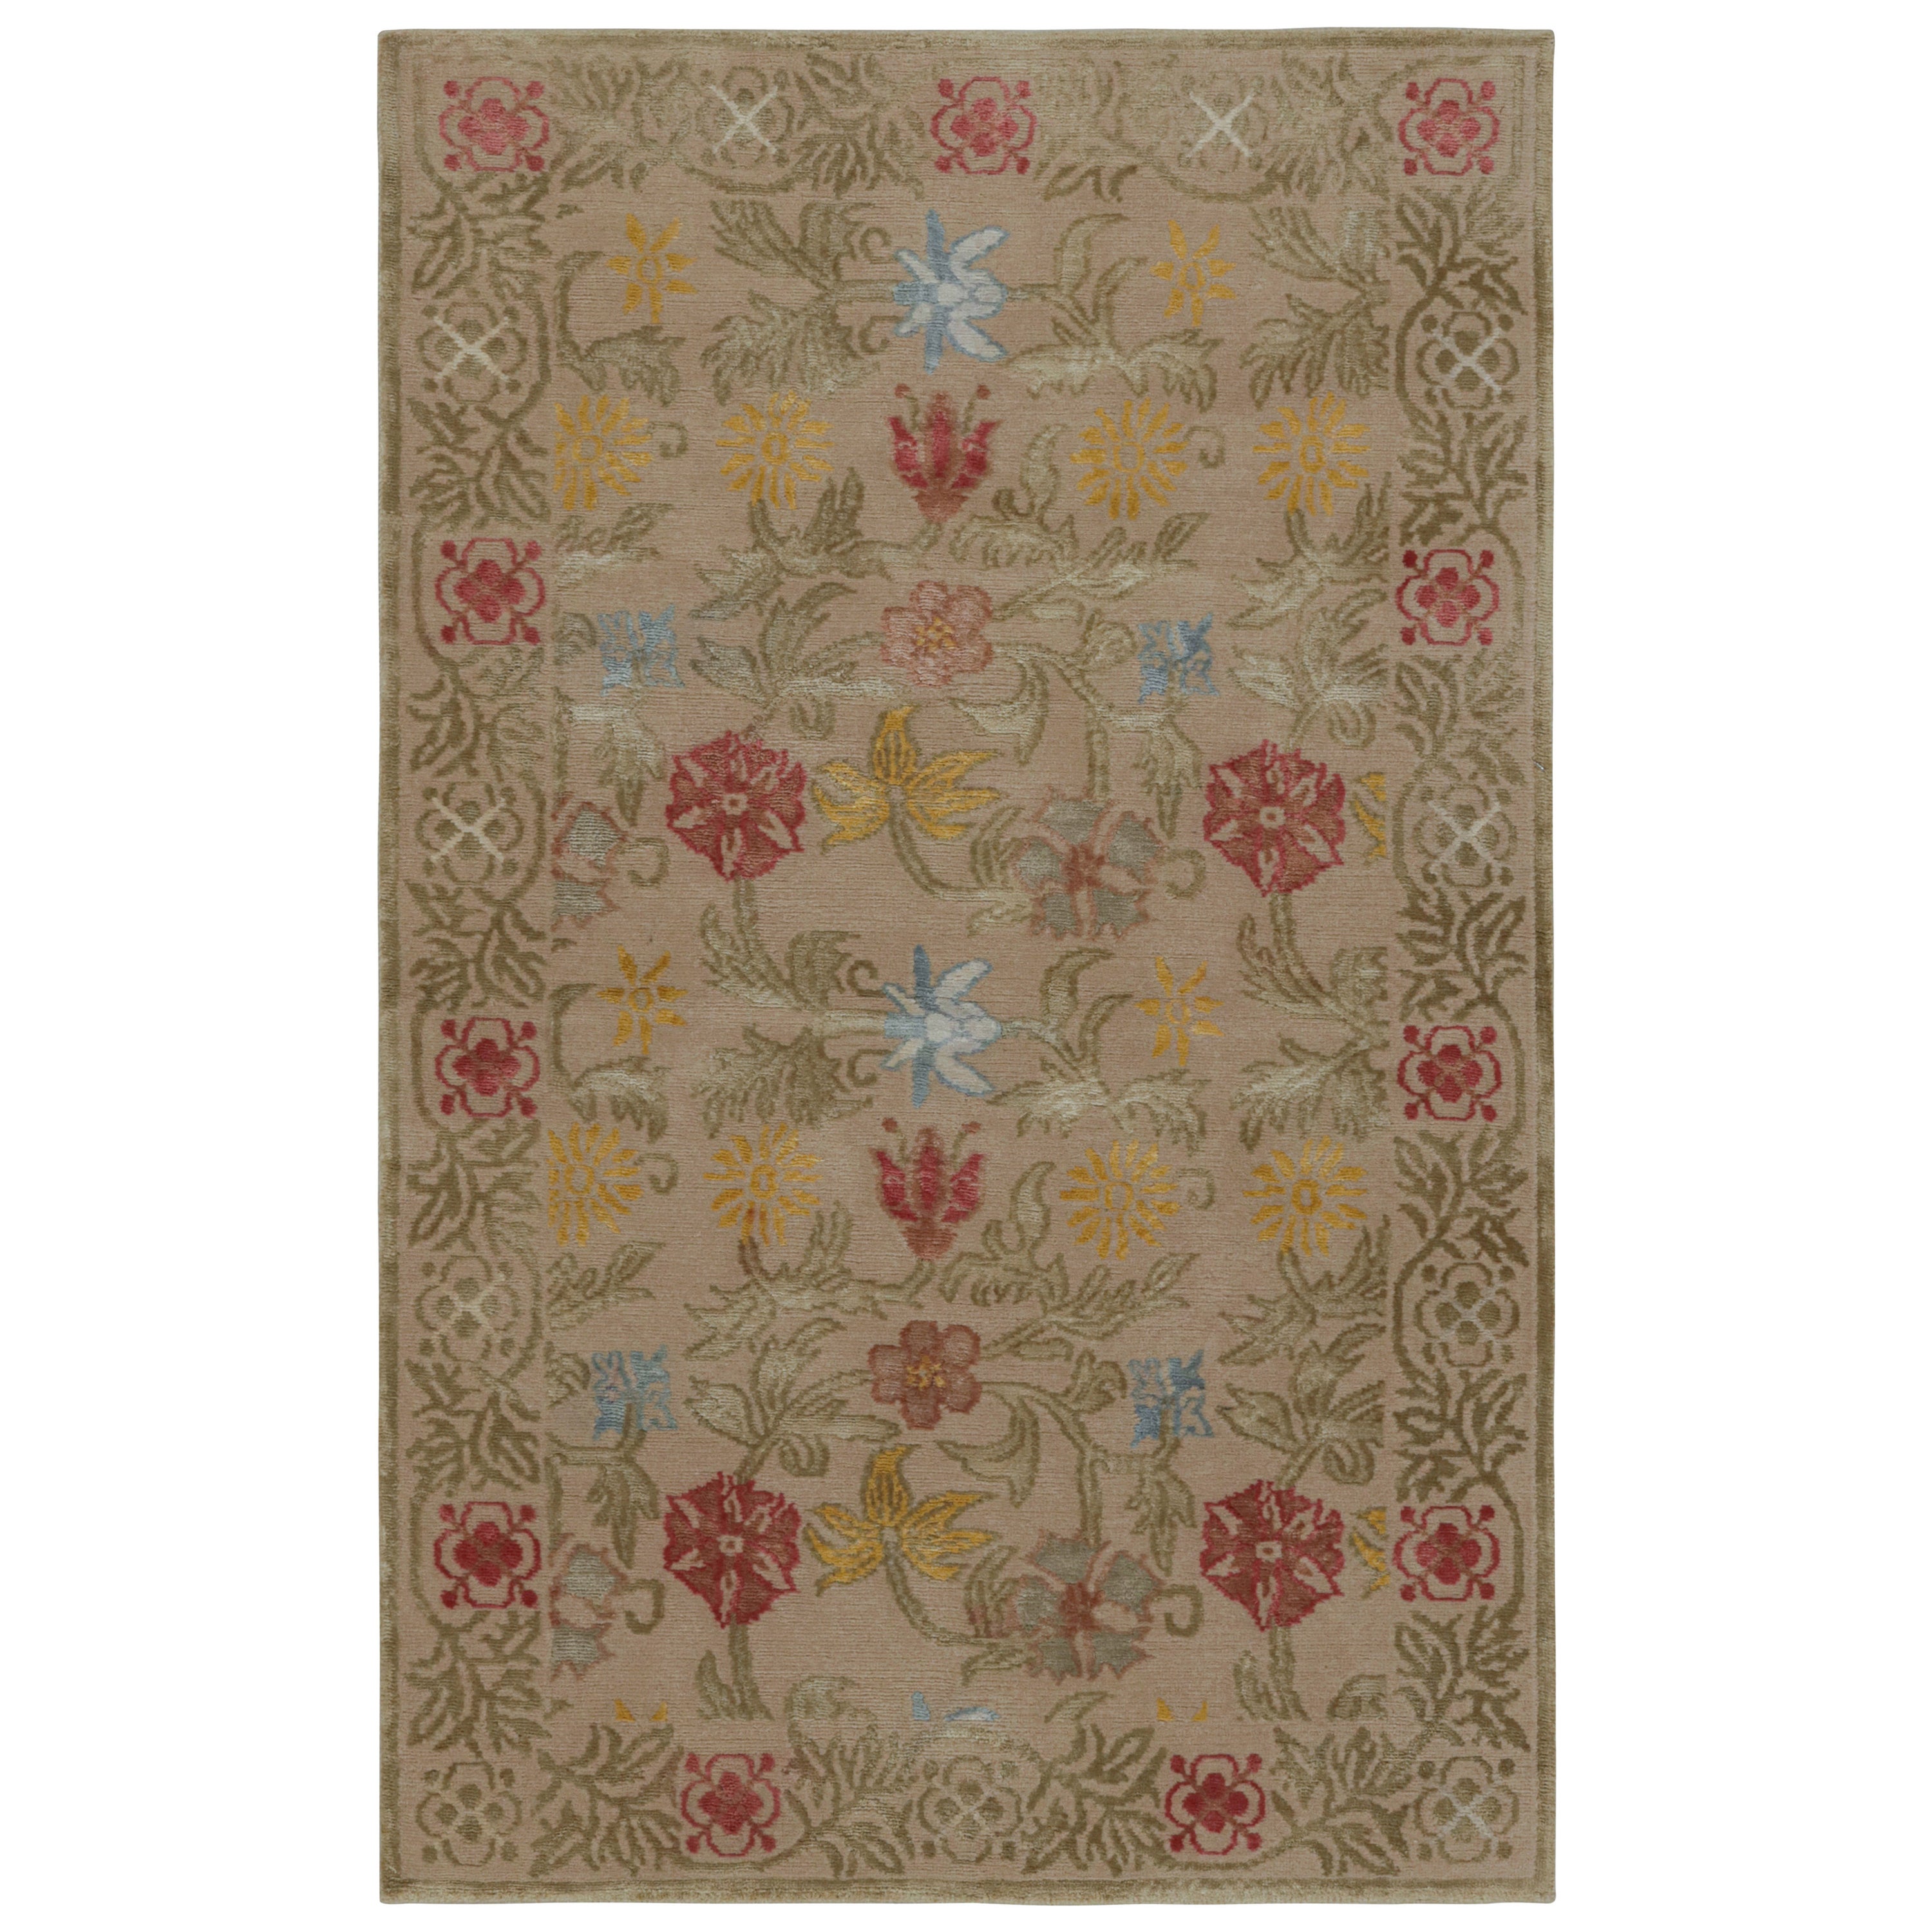 Rug & Kilim’s Spanish European Style Rug in Beige with Floral Patterns “Bilbao”  For Sale